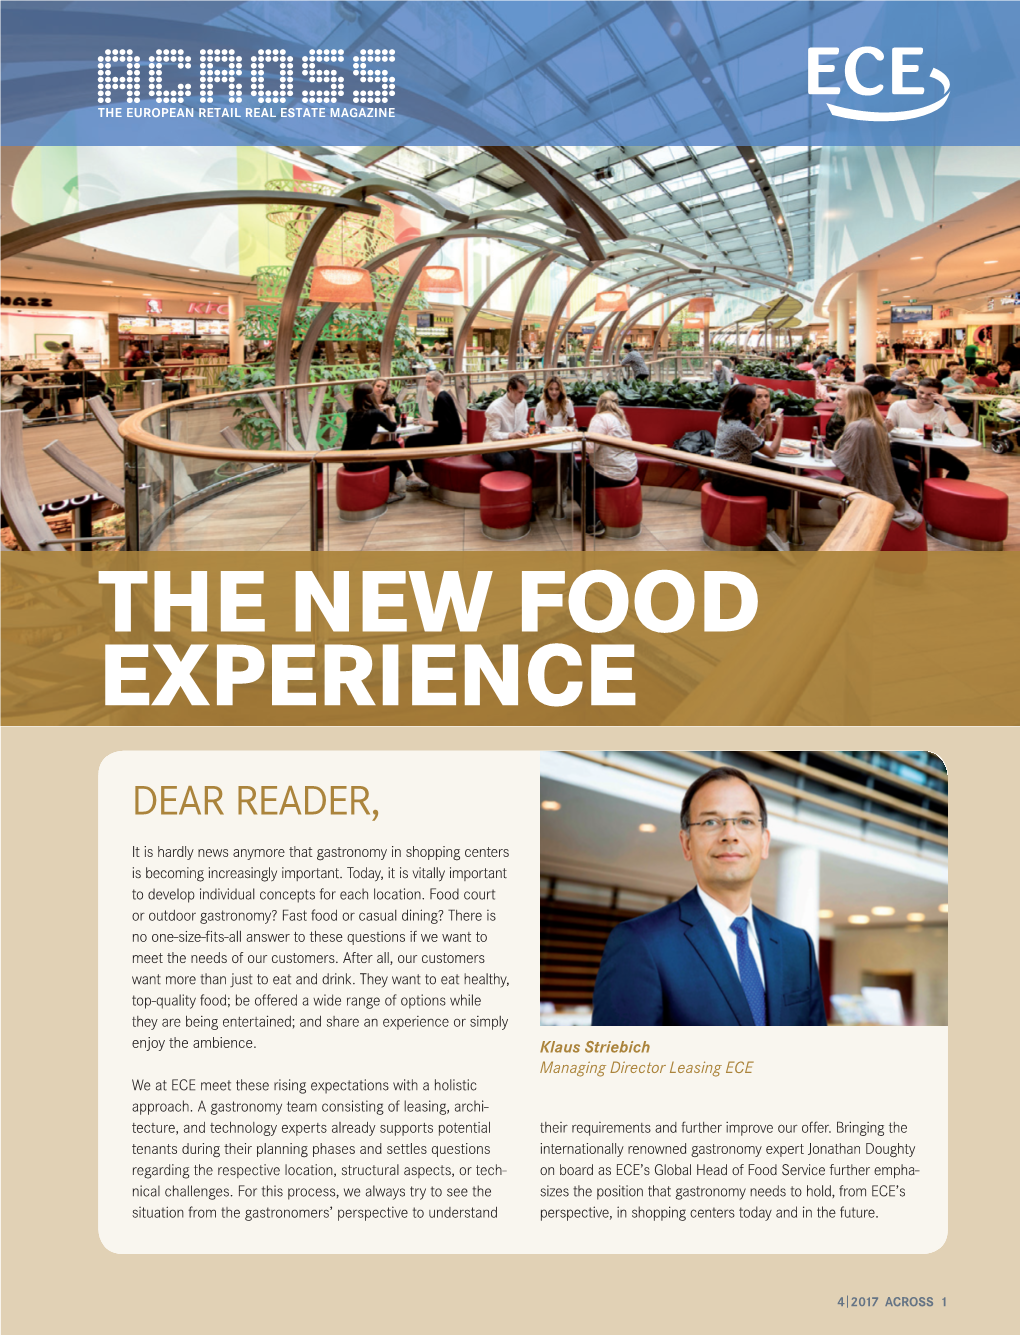 The New Food Experience